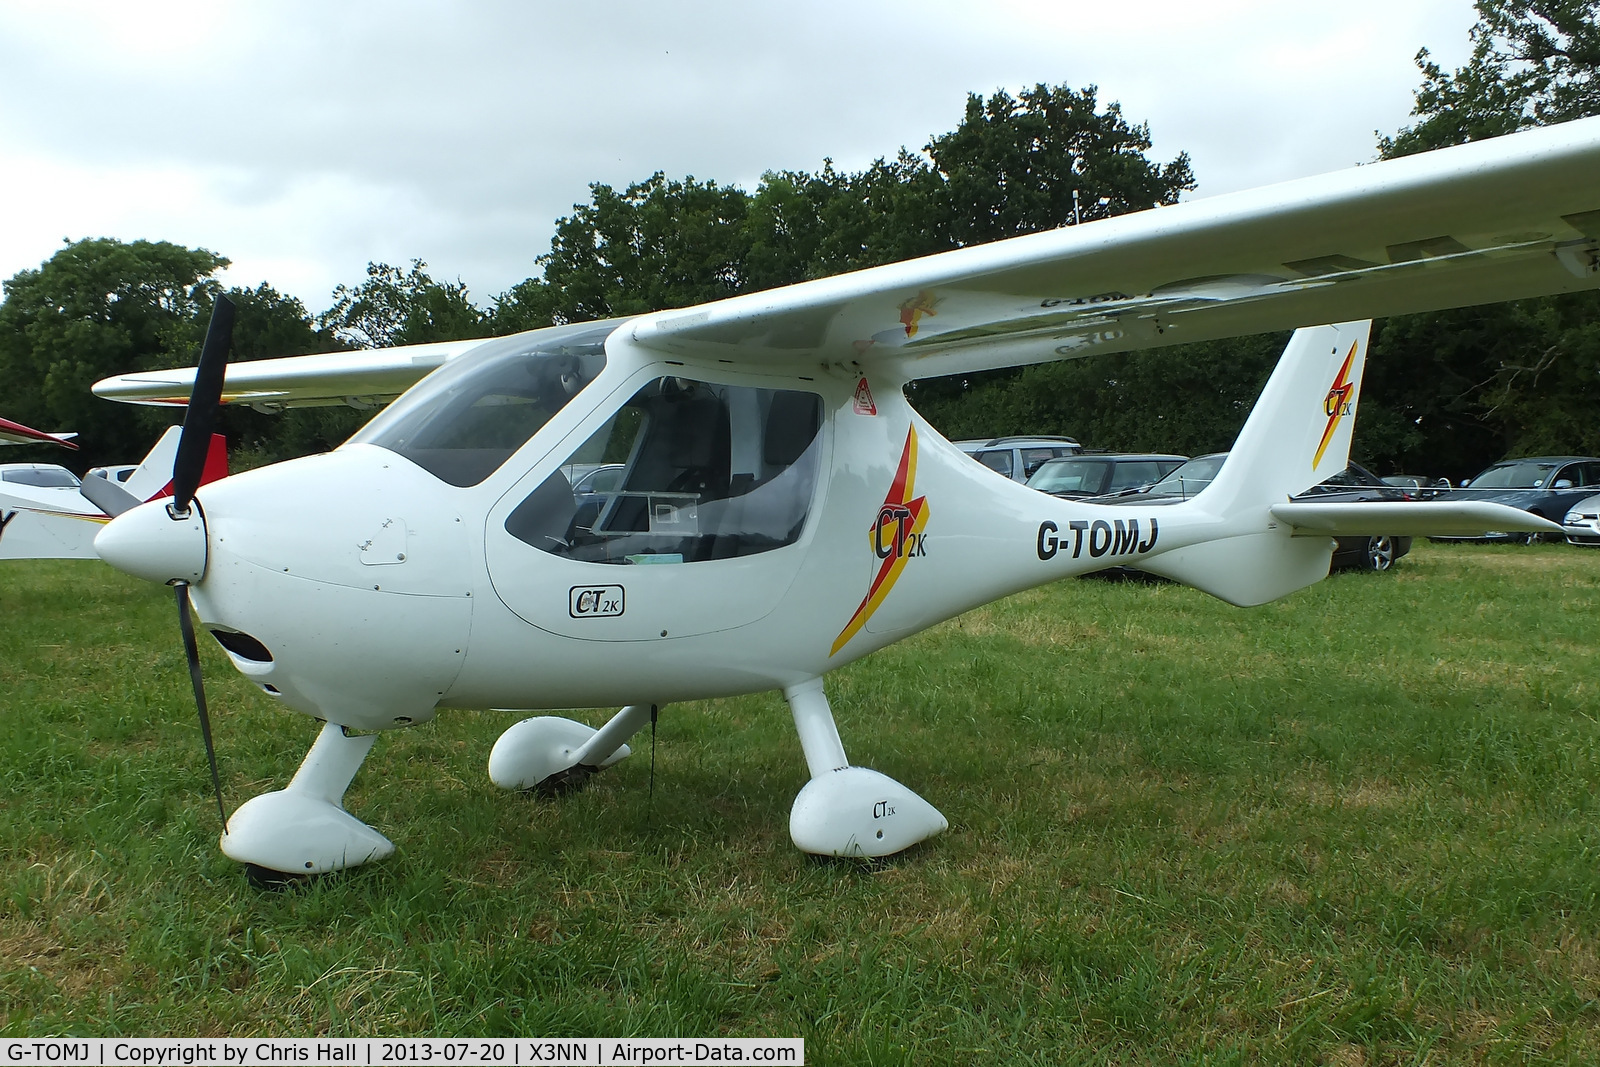 G-TOMJ, 2003 Flight Design CT2K C/N 7975, at the Stoke Golding stakeout 2013